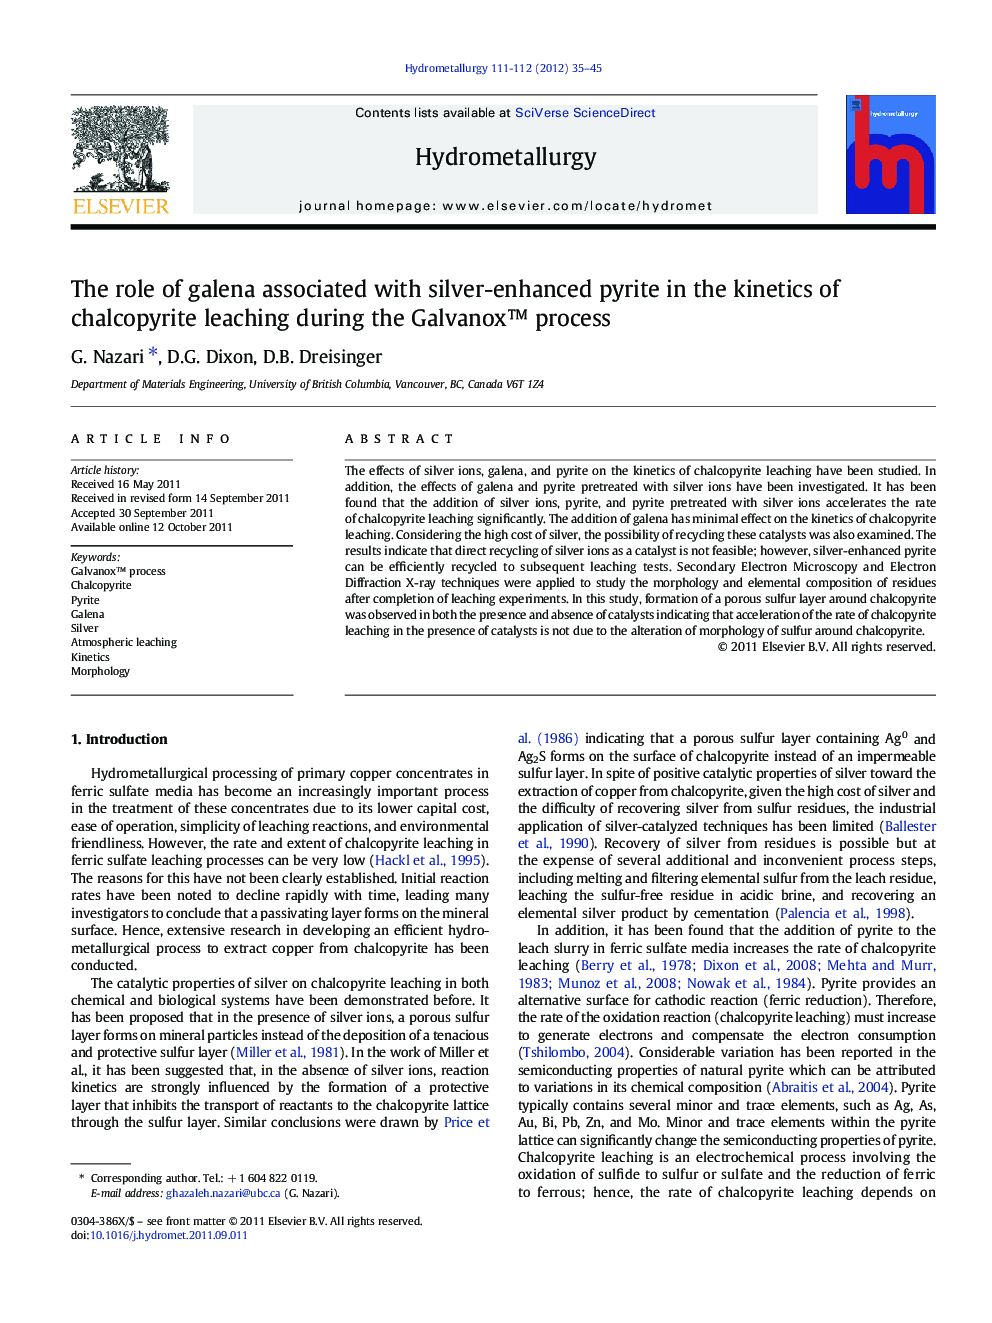 The role of galena associated with silver-enhanced pyrite in the kinetics of chalcopyrite leaching during the Galvanox™ process